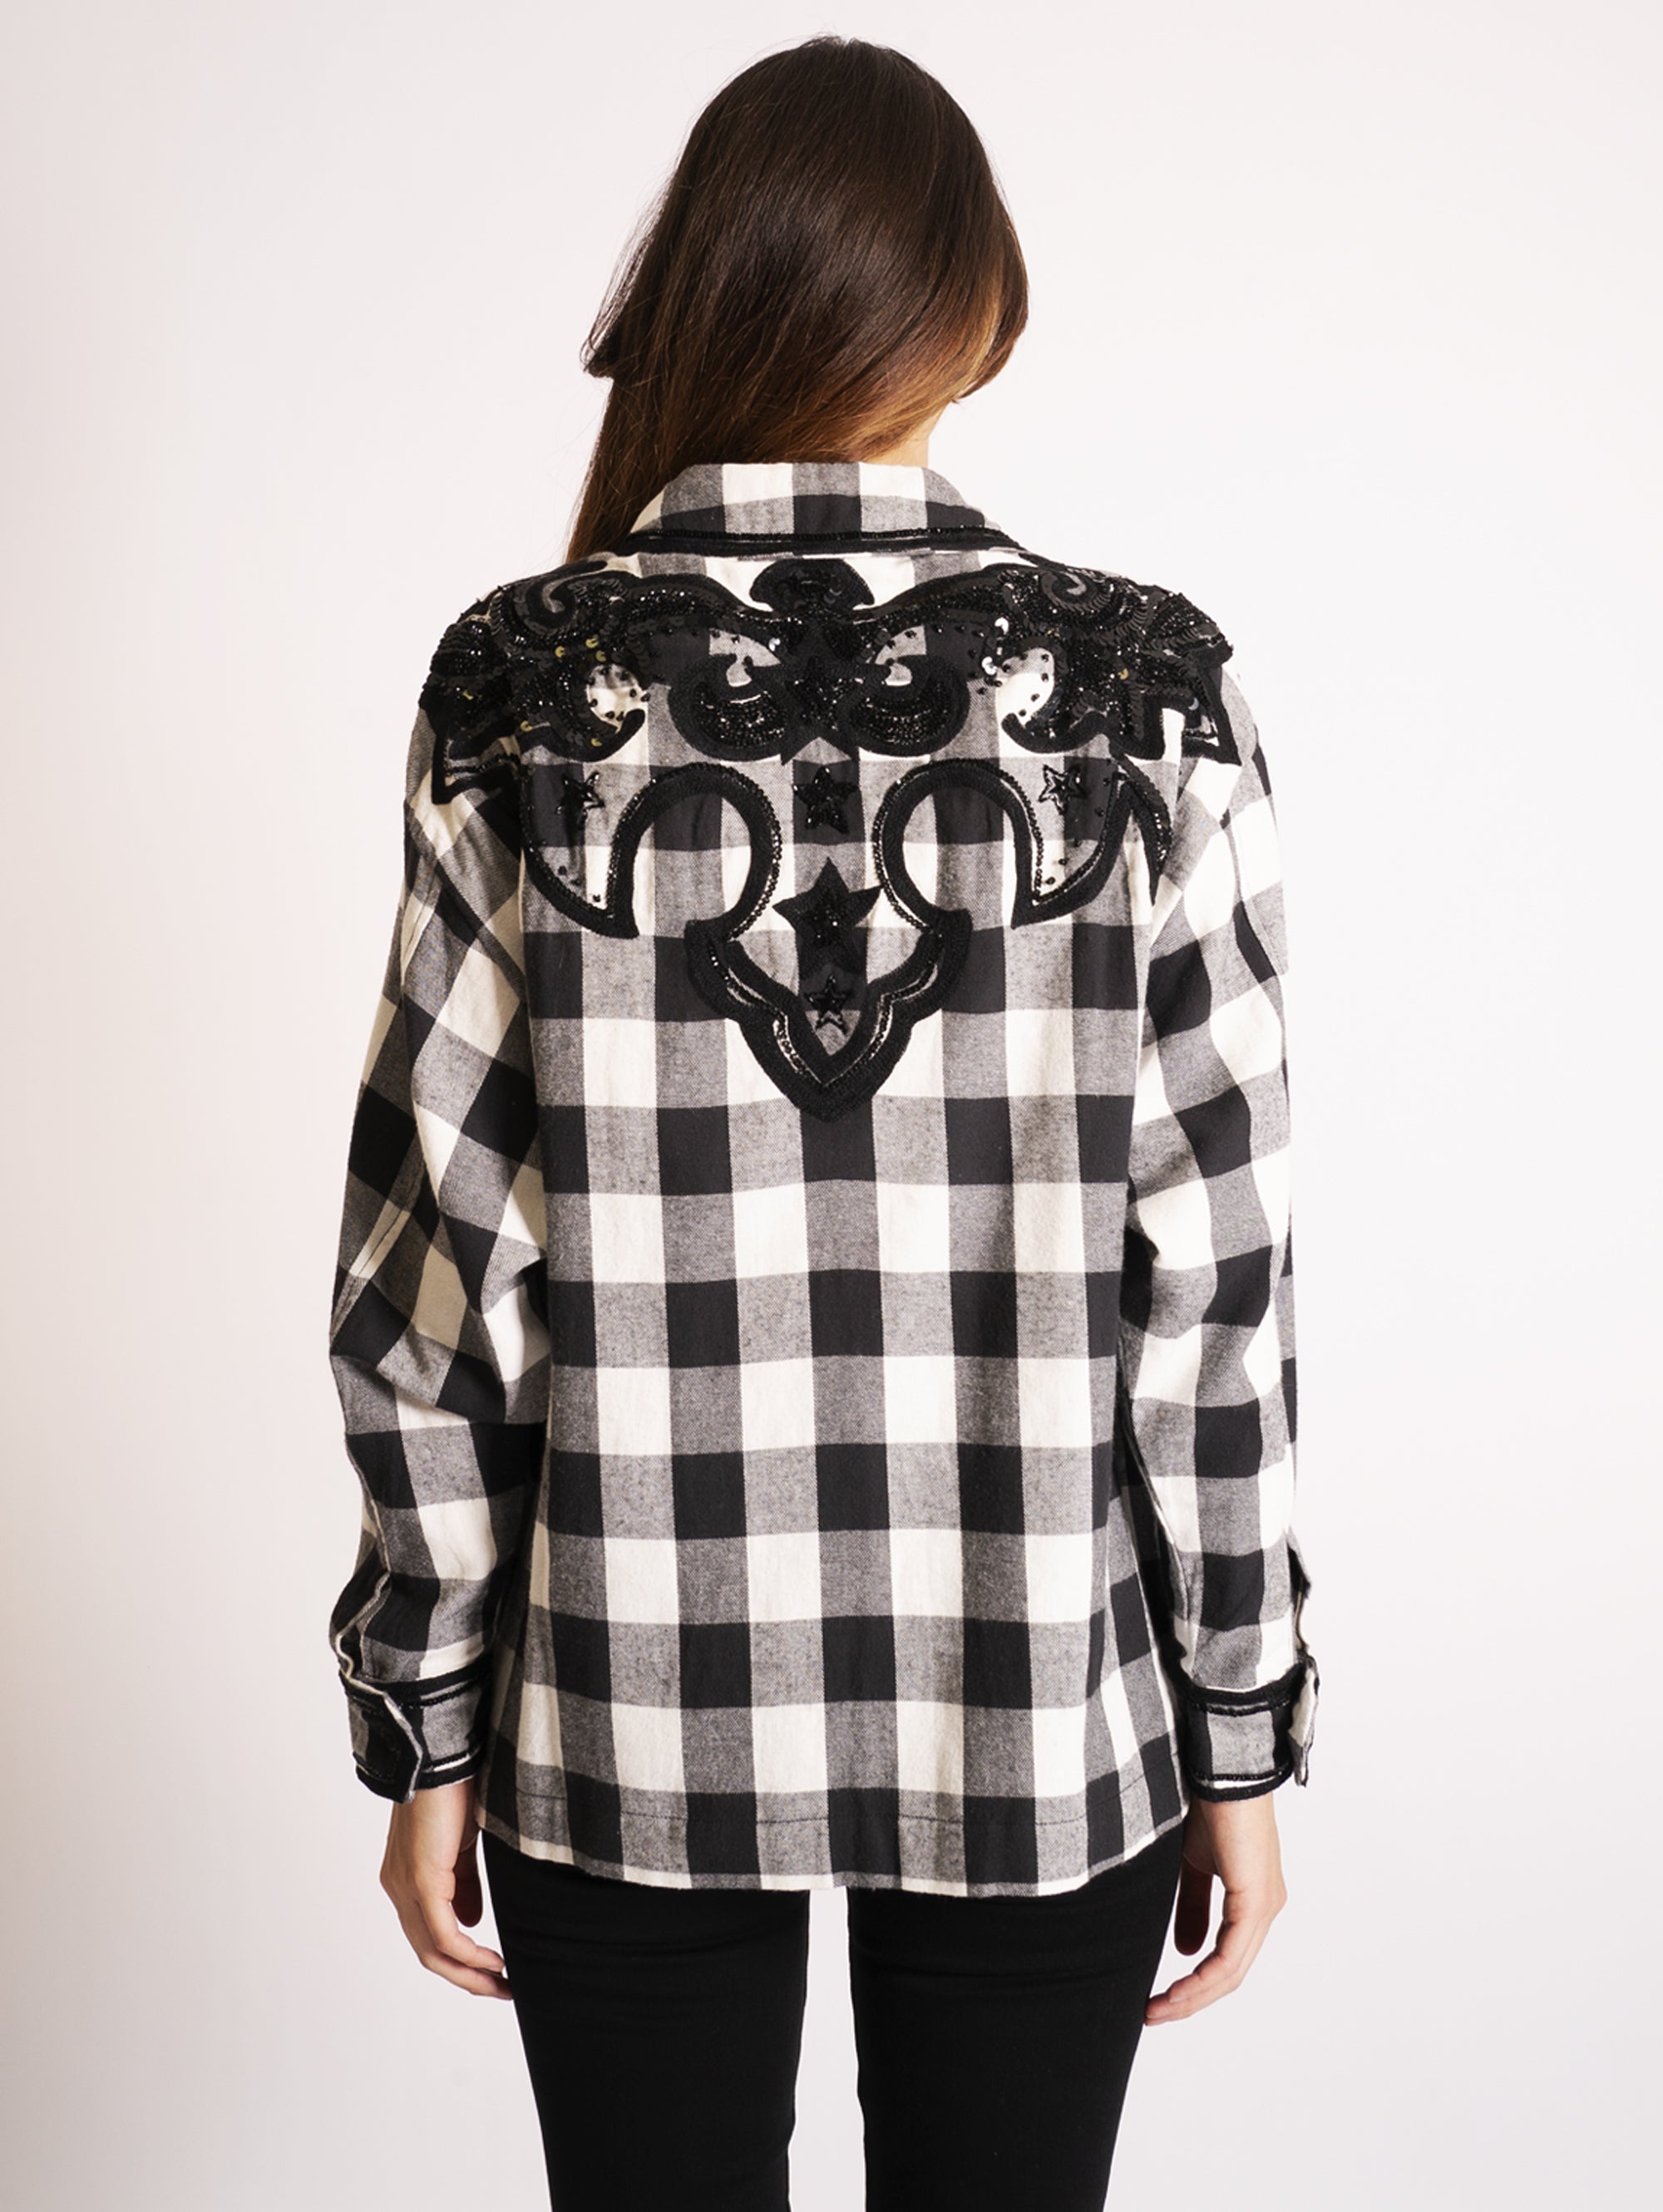 Overshirt with White / Black Embroidery